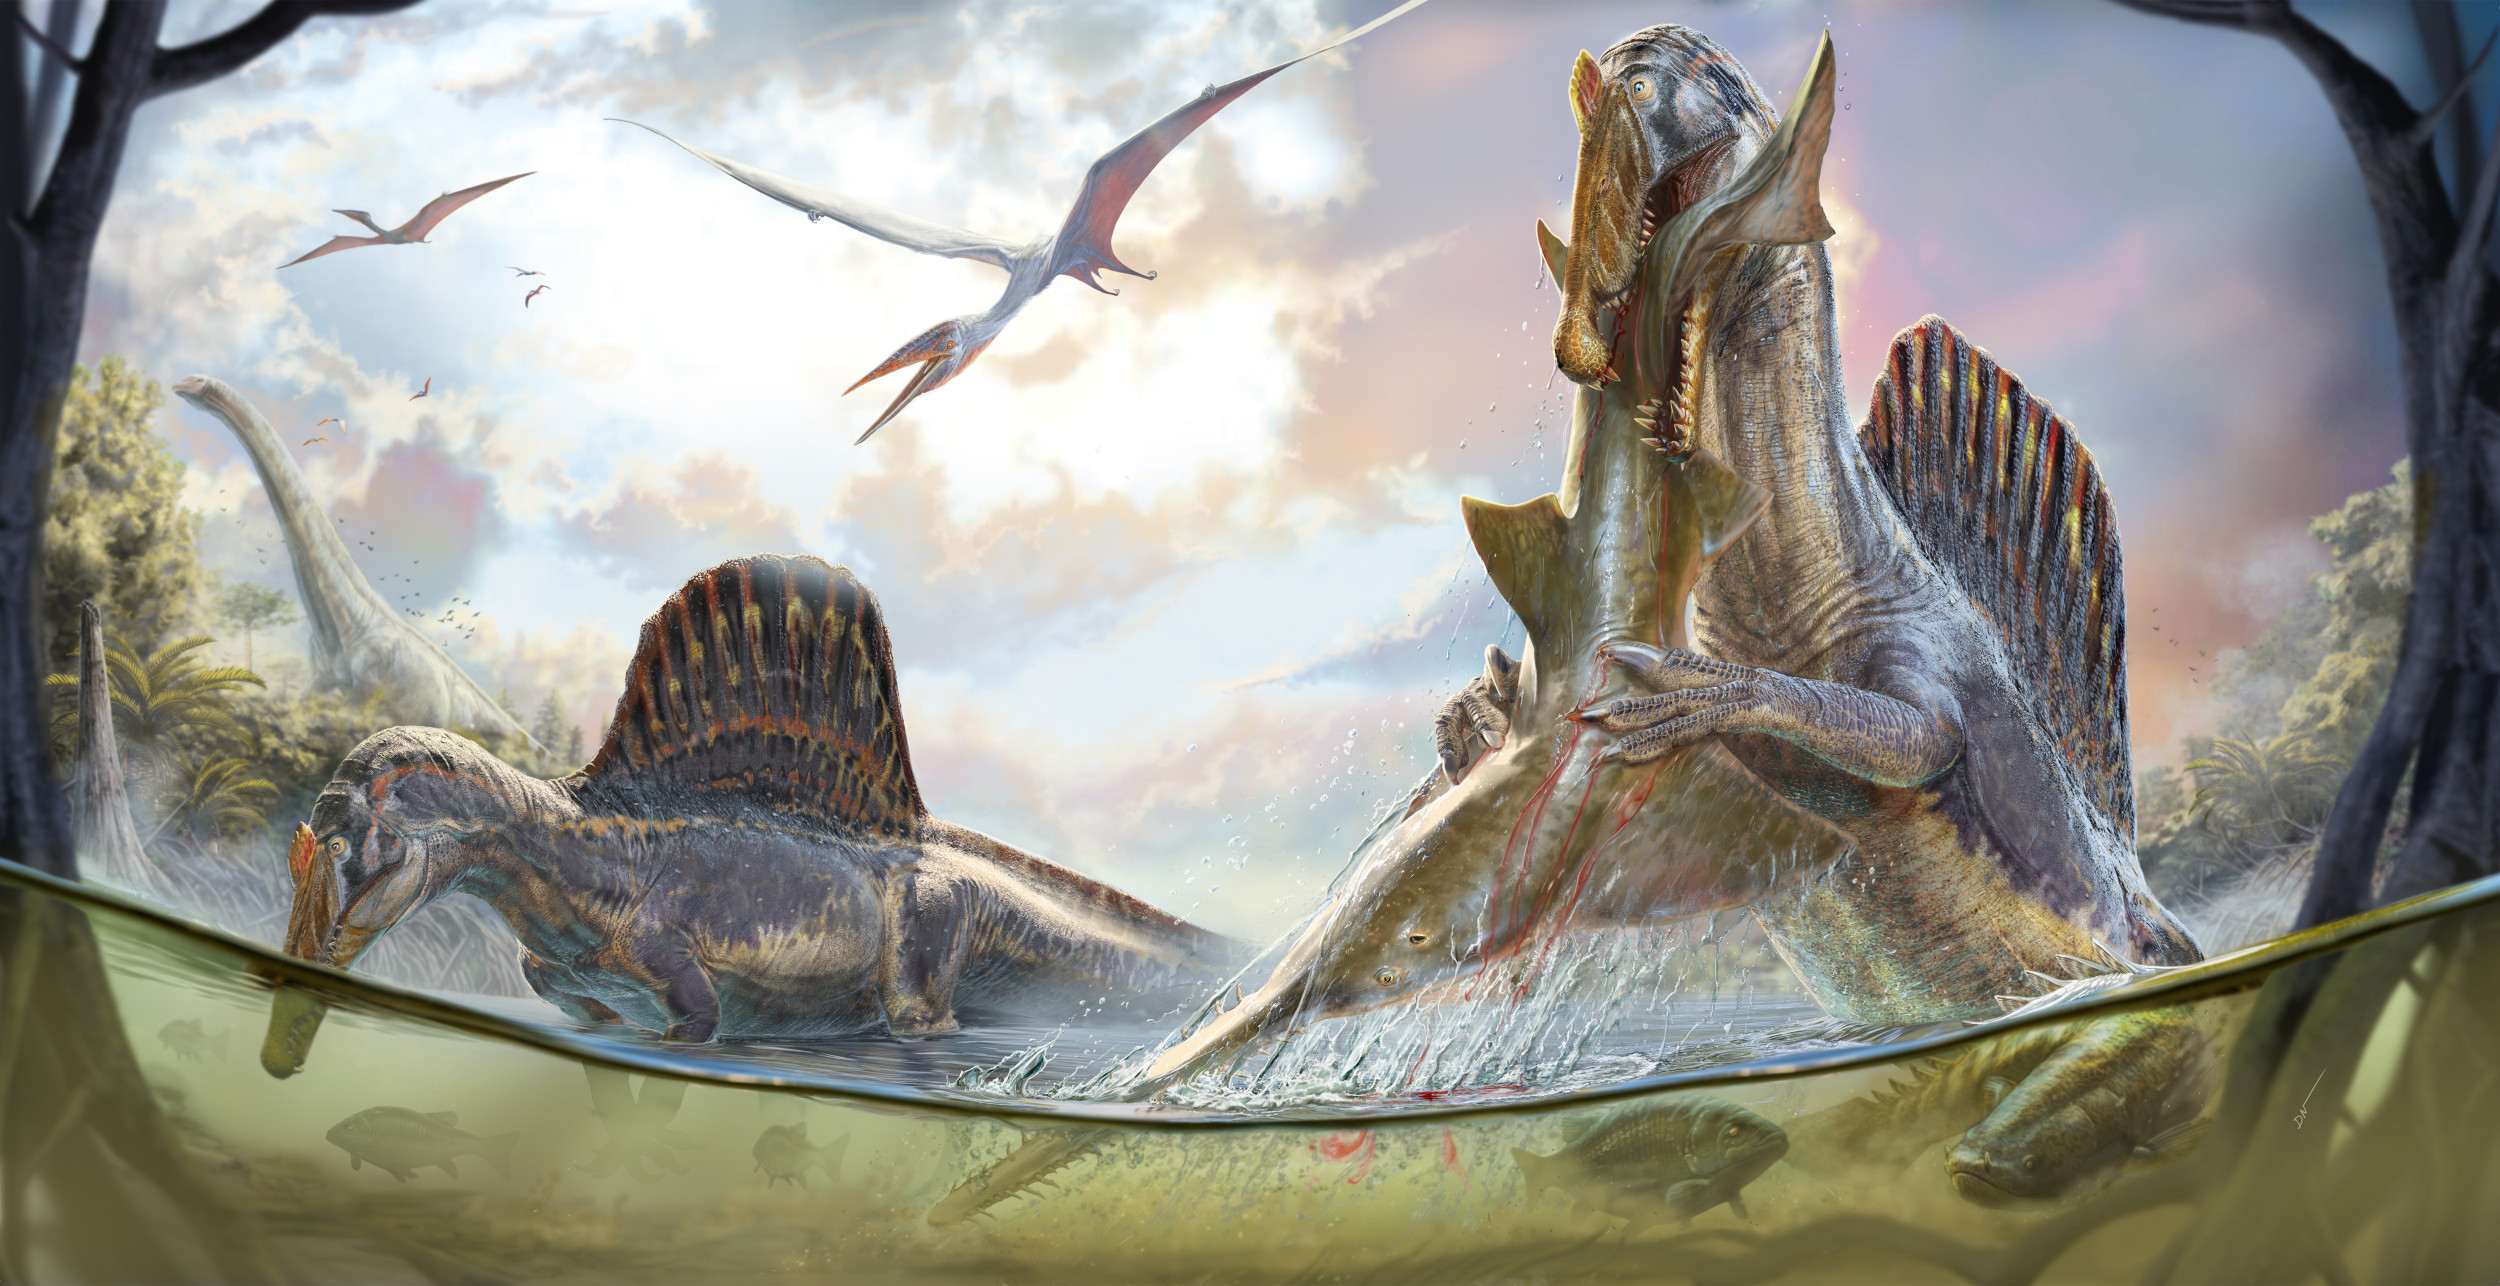 Large Sail-Backed Dinosaur Would possibly Have Been ‘Heron From Hell’